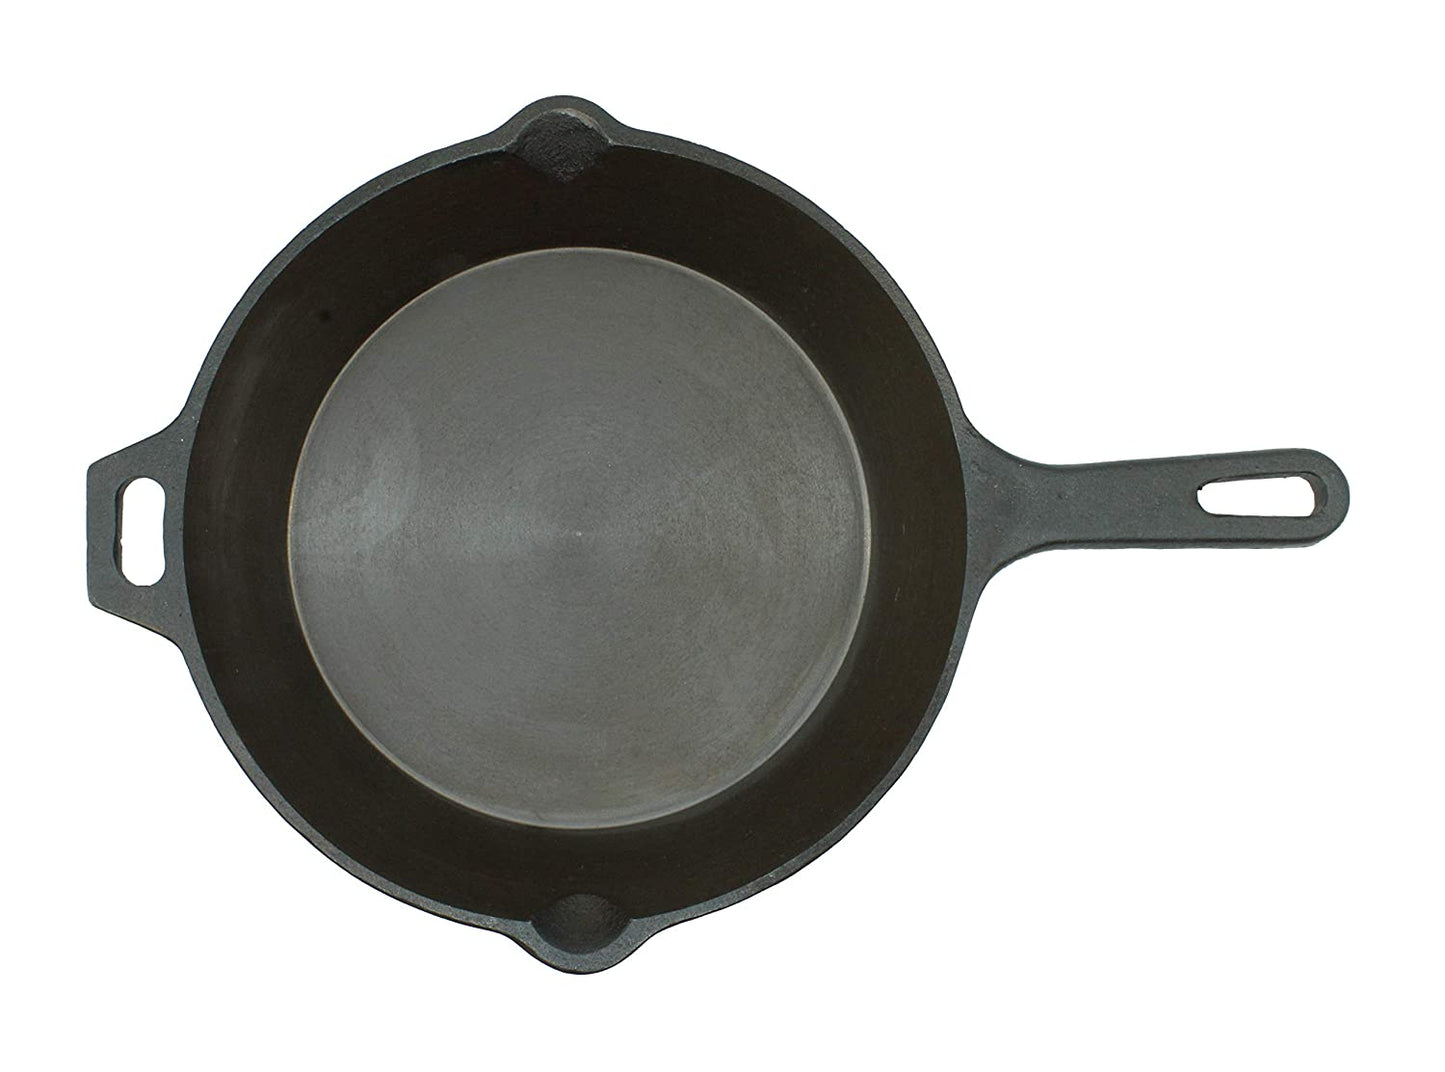 Pre-Seasoned Cast Iron Skillet | Fry Pan 10.25 Inch | 26 cm (Induction Compatible)